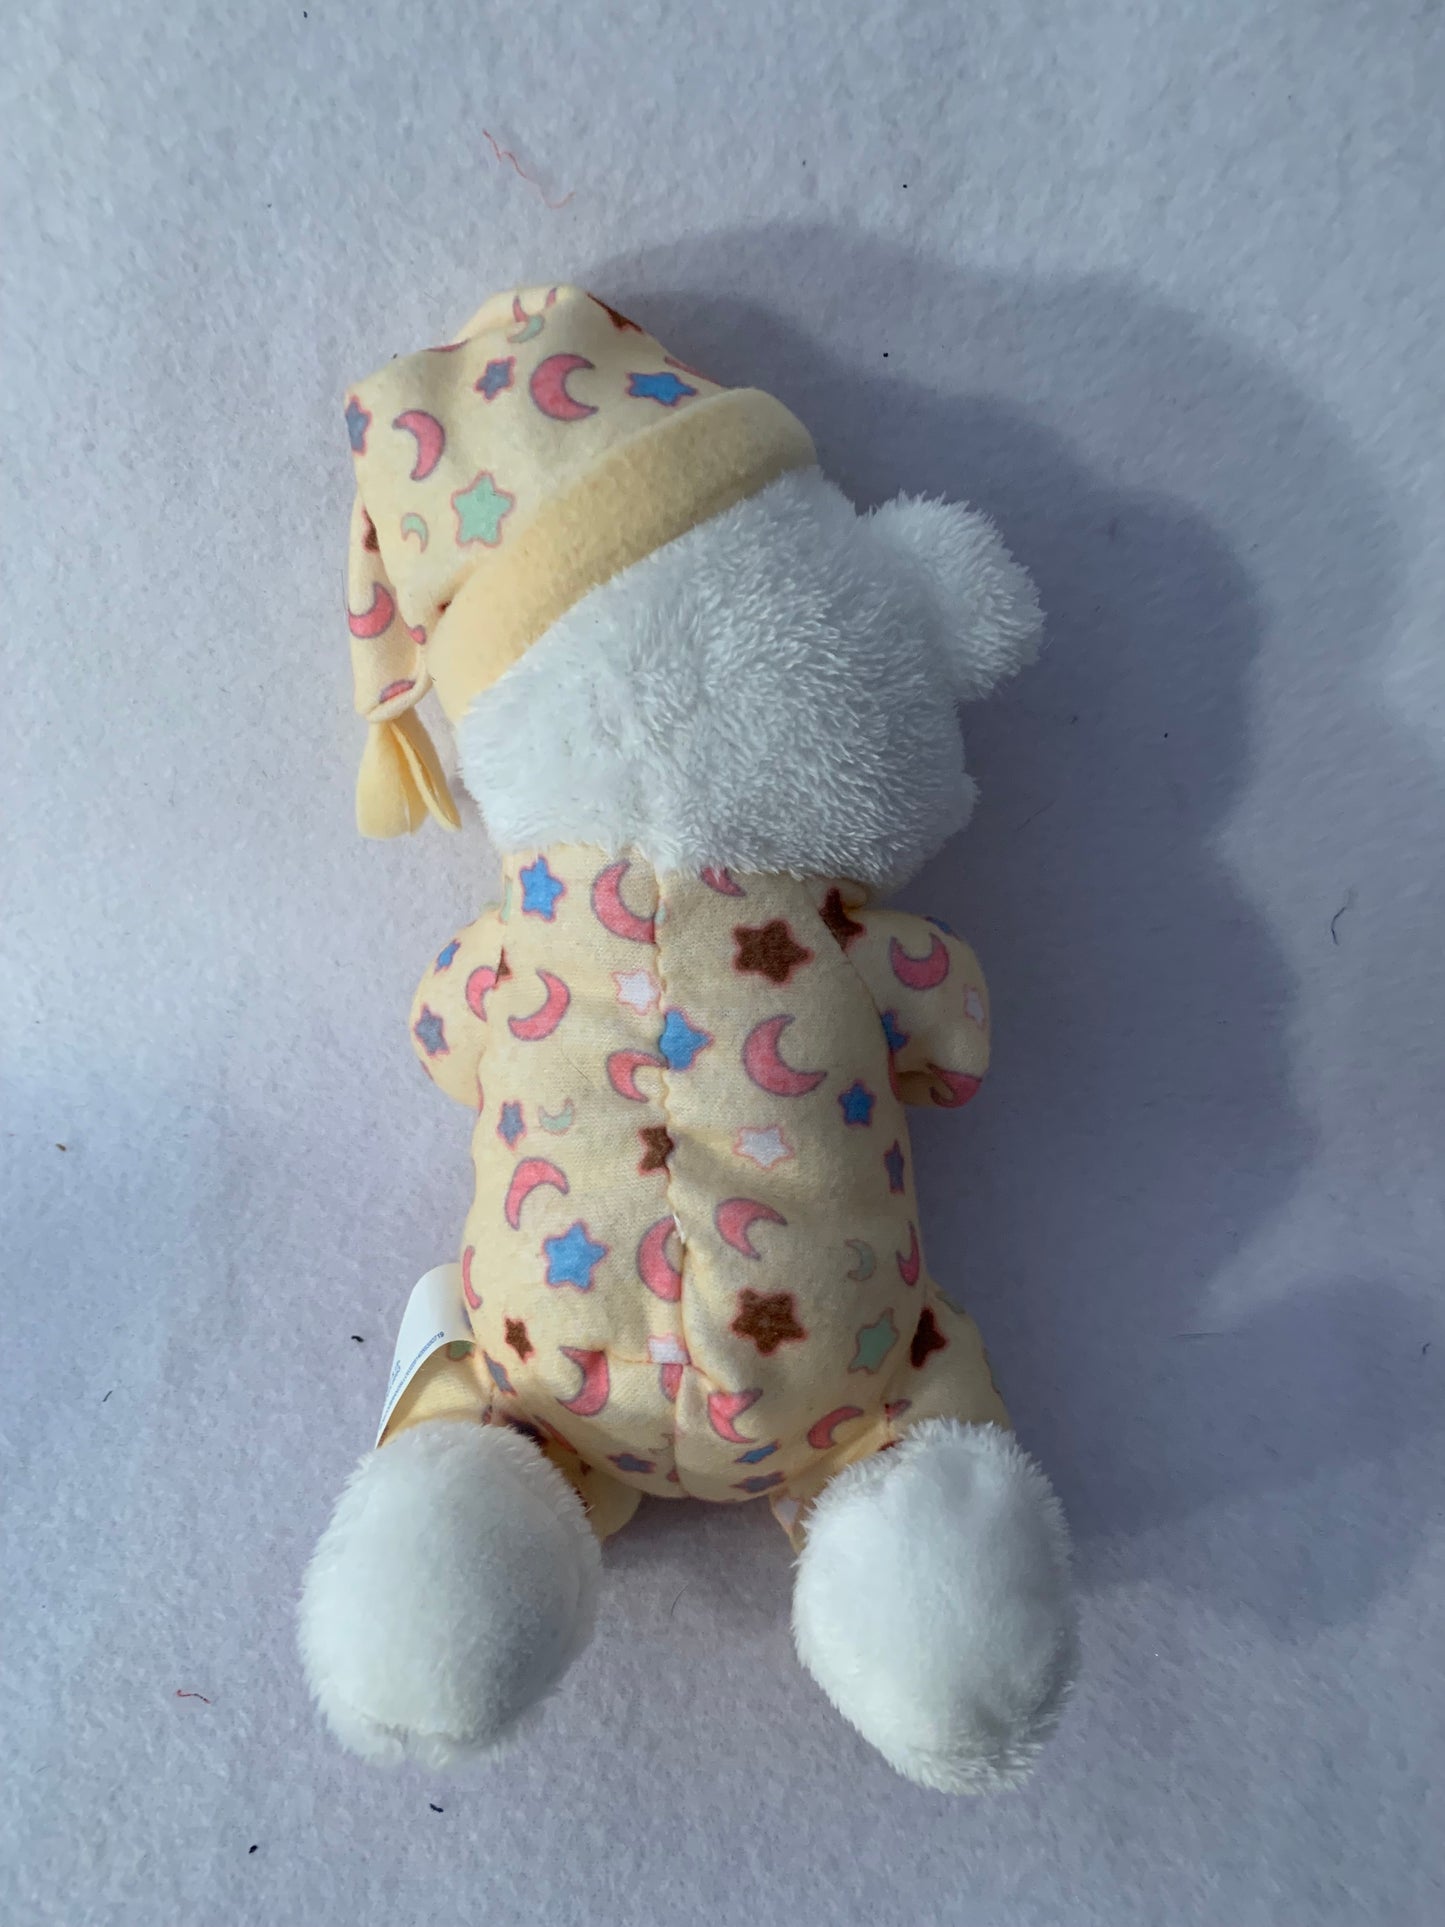 Weighted Stuffed Animal - Weighted Teddy Bear with 3 lbs, washable plush buddy